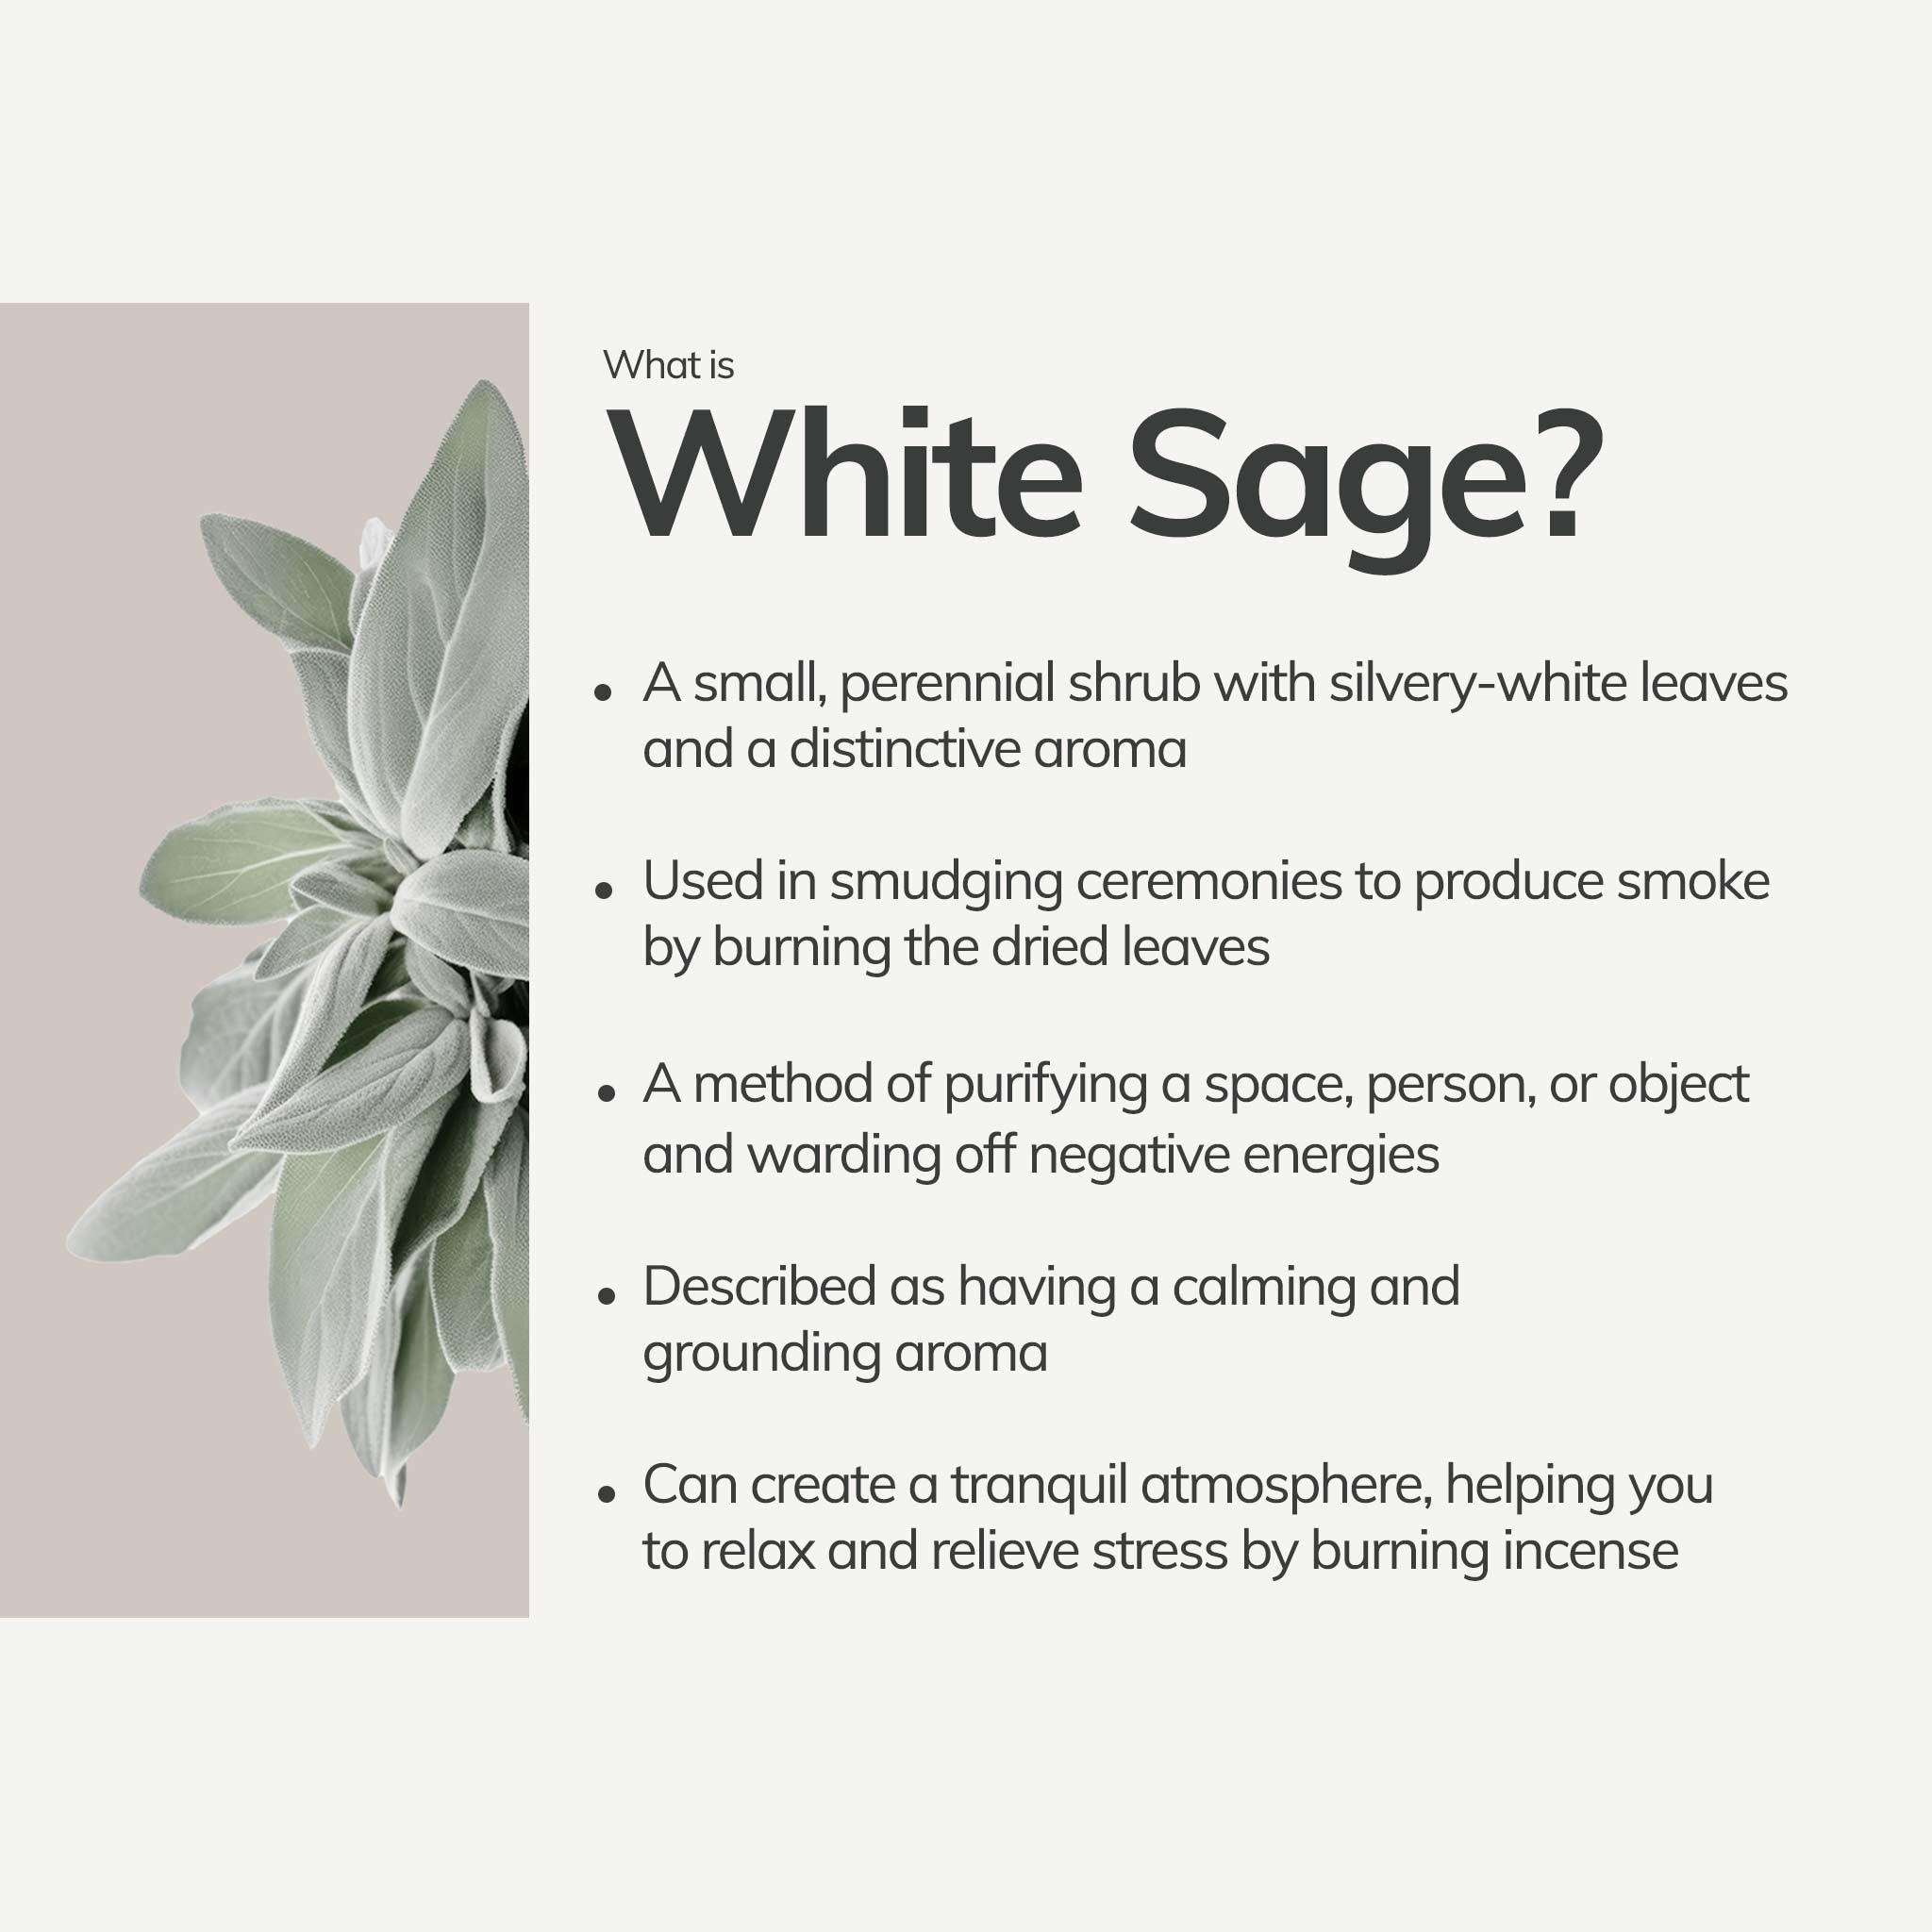 Left: dried white sage plant; right: bullet list telling what is white sage plant used for.